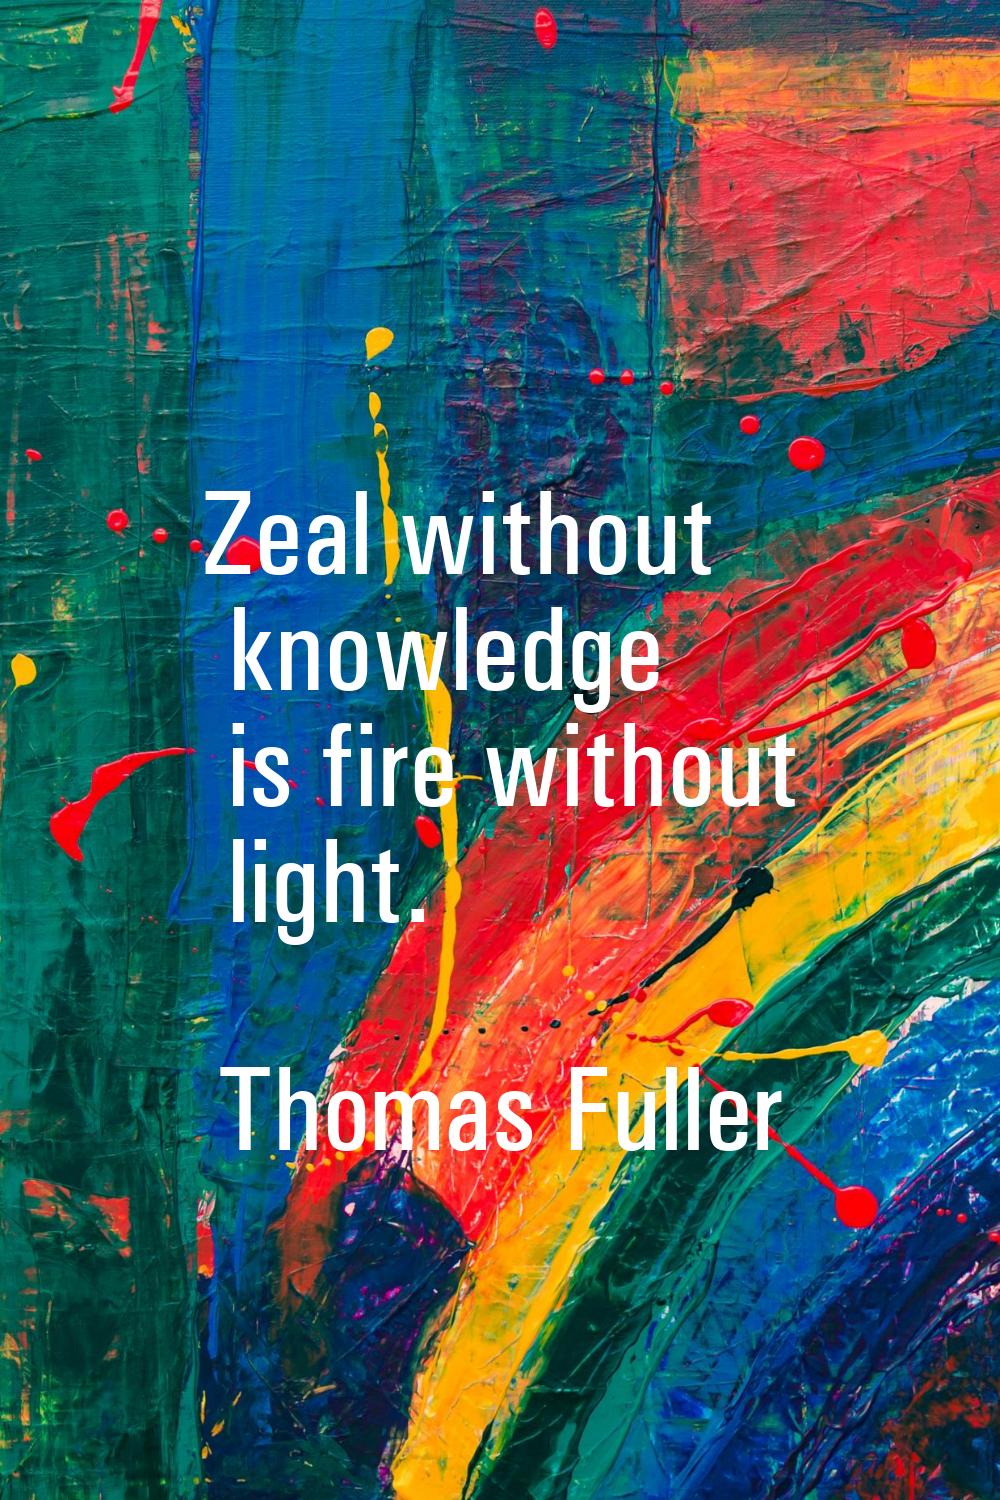 Zeal without knowledge is fire without light.